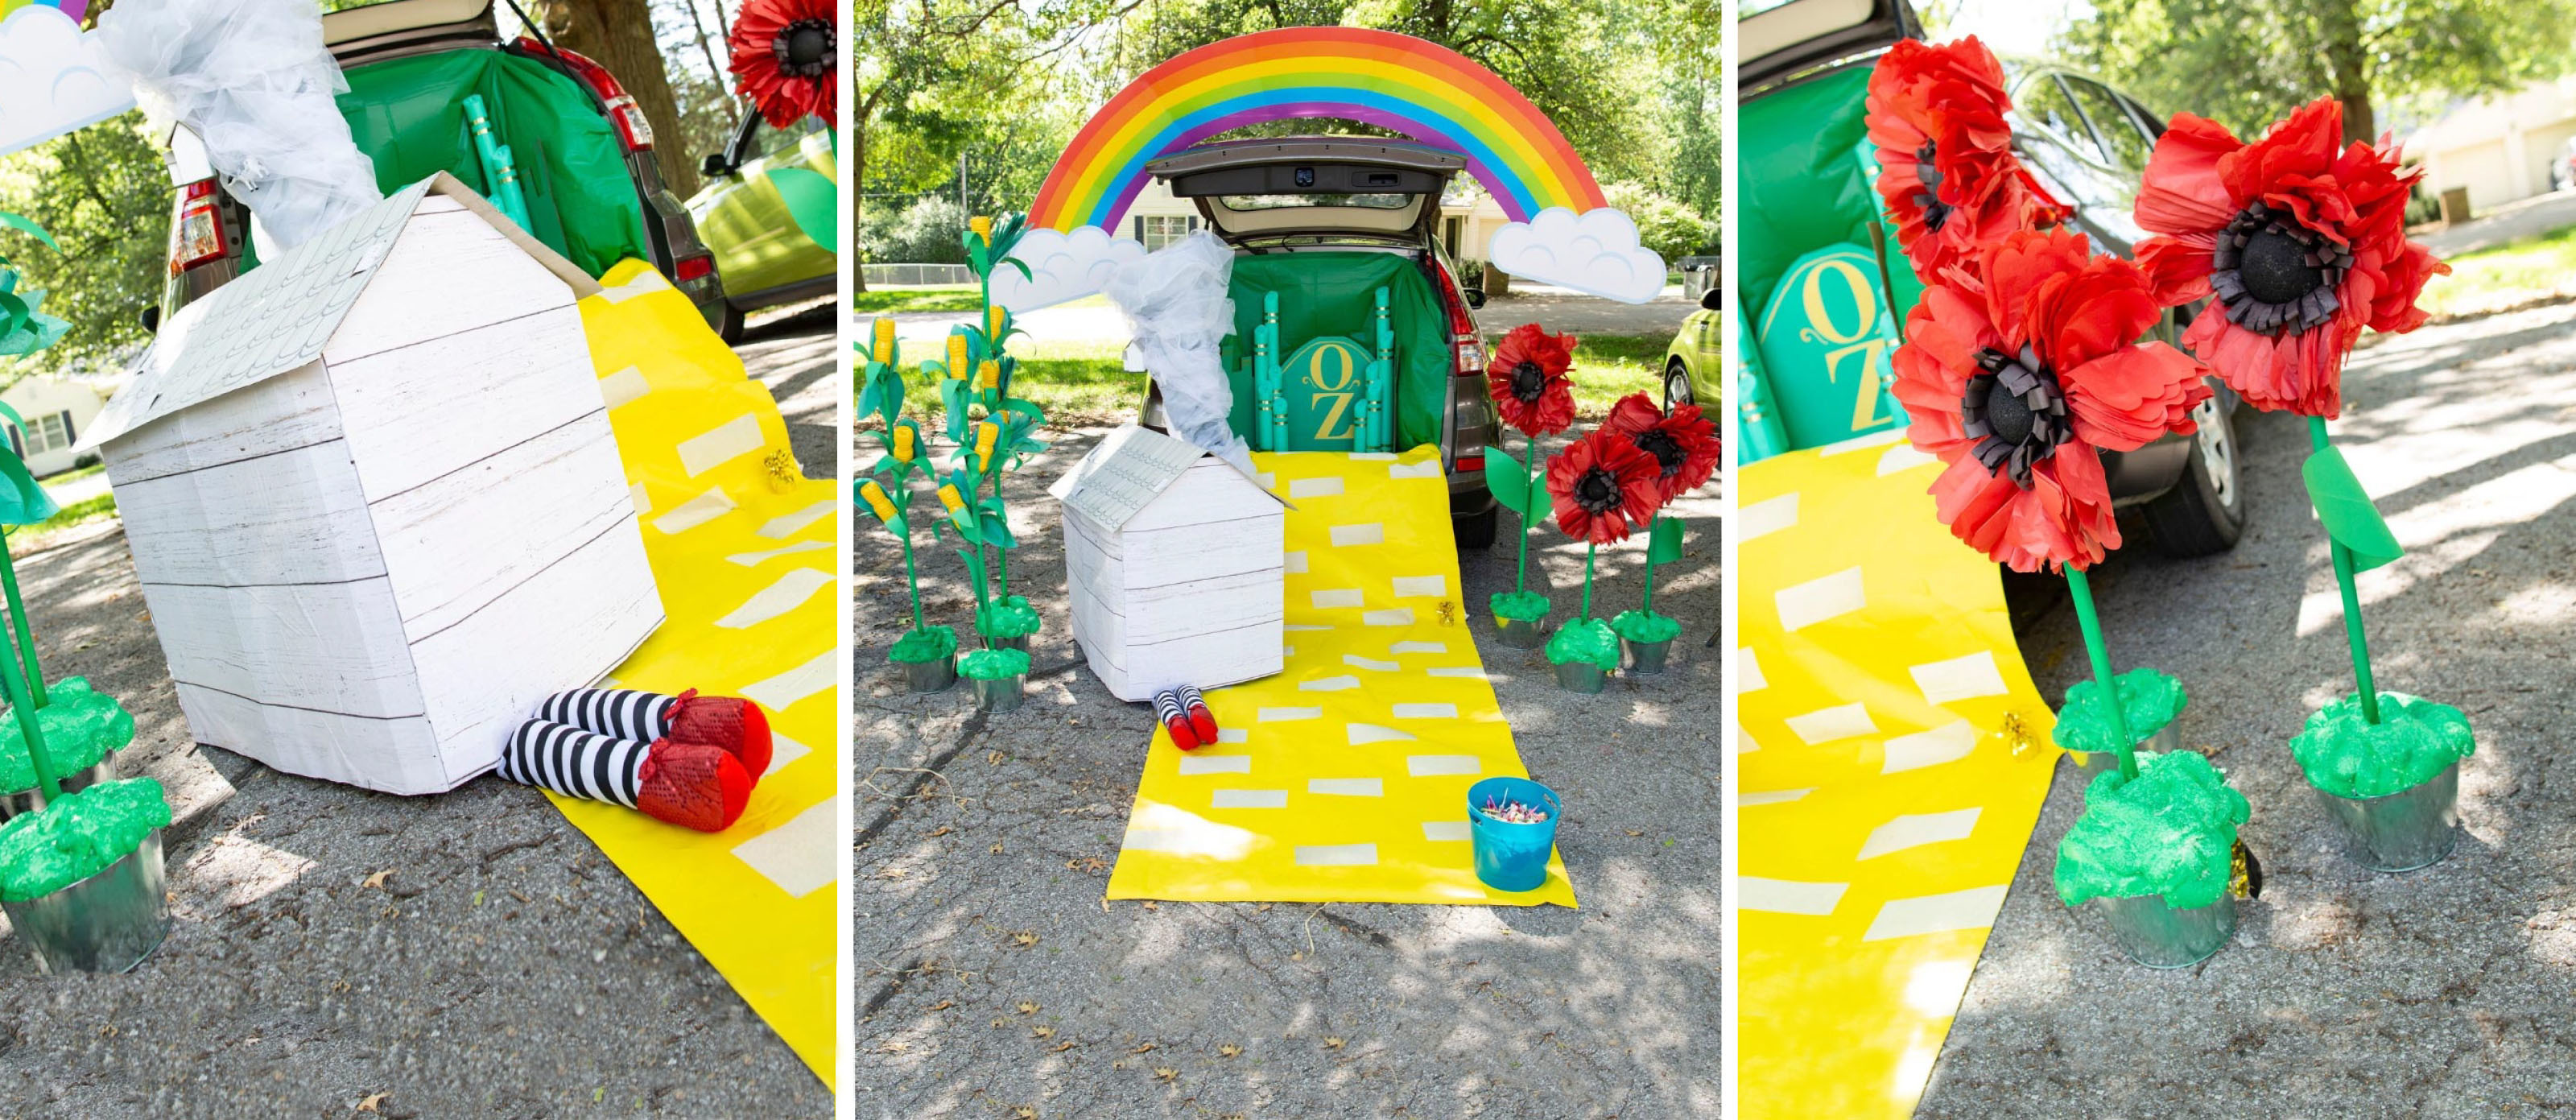 Wizard of Oz Inspired Trunk or Treat Idea